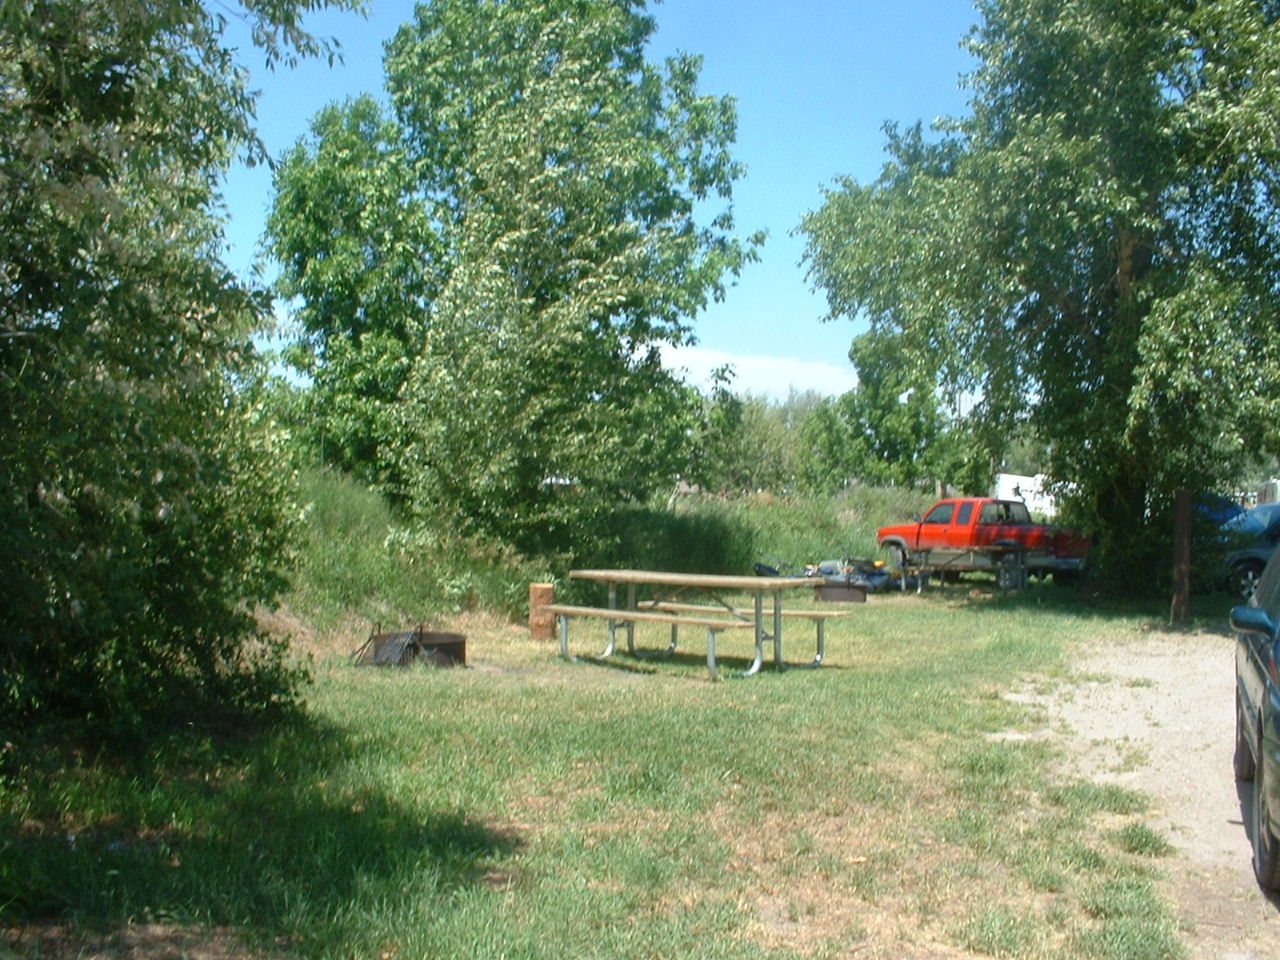 picture showing Typical campsite at Craig Fishing Access.